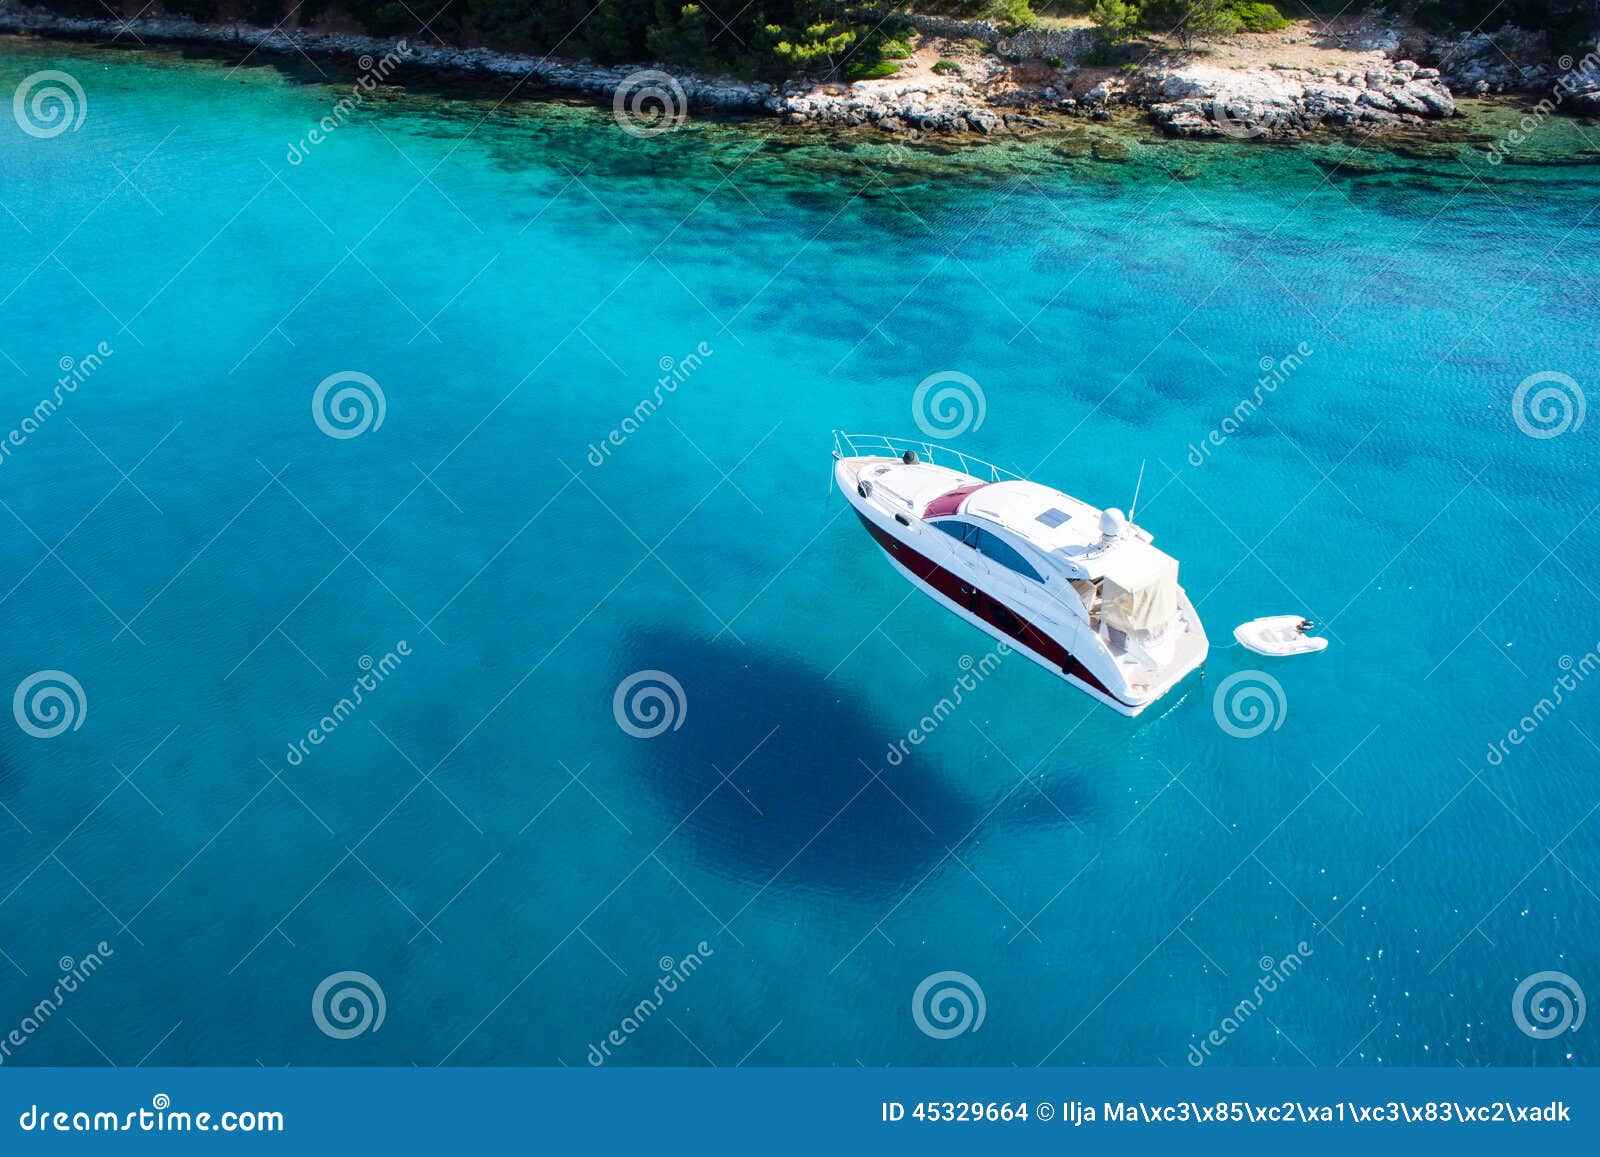 amazing view to boat, clear water - caribbean paradise